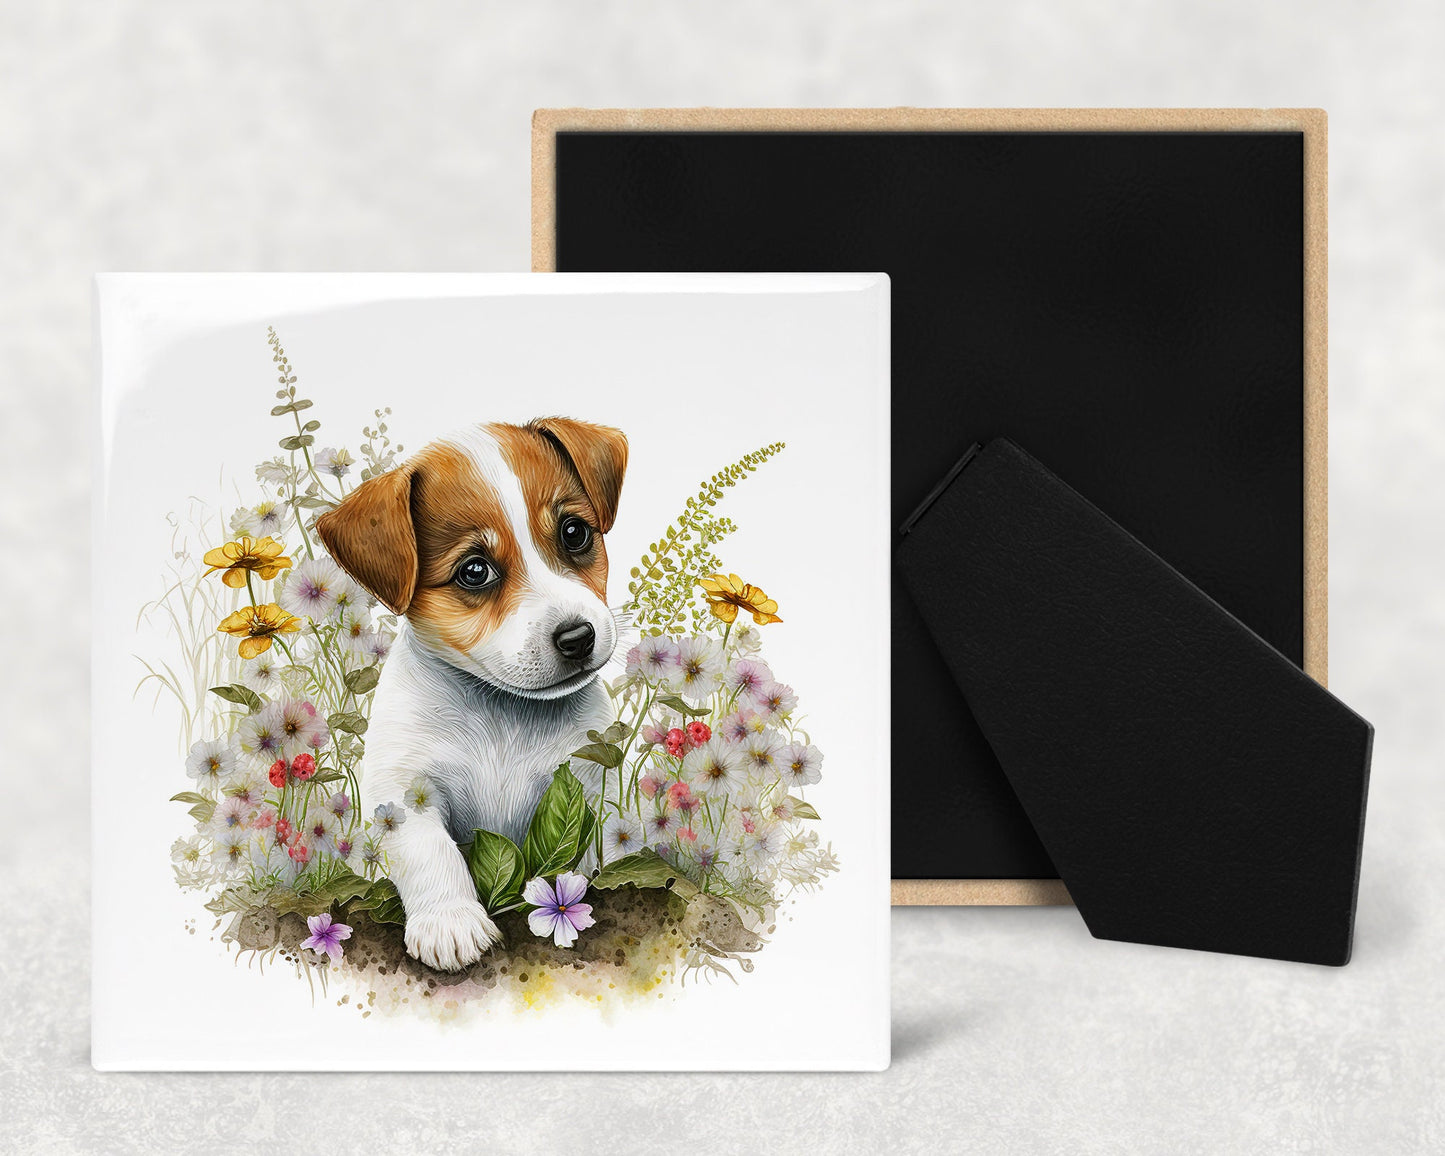 Cute Jack Russell Puppy Art Decorative Ceramic Tile Set with Optional Easel Back - Available in 4 sizes - Set of 4